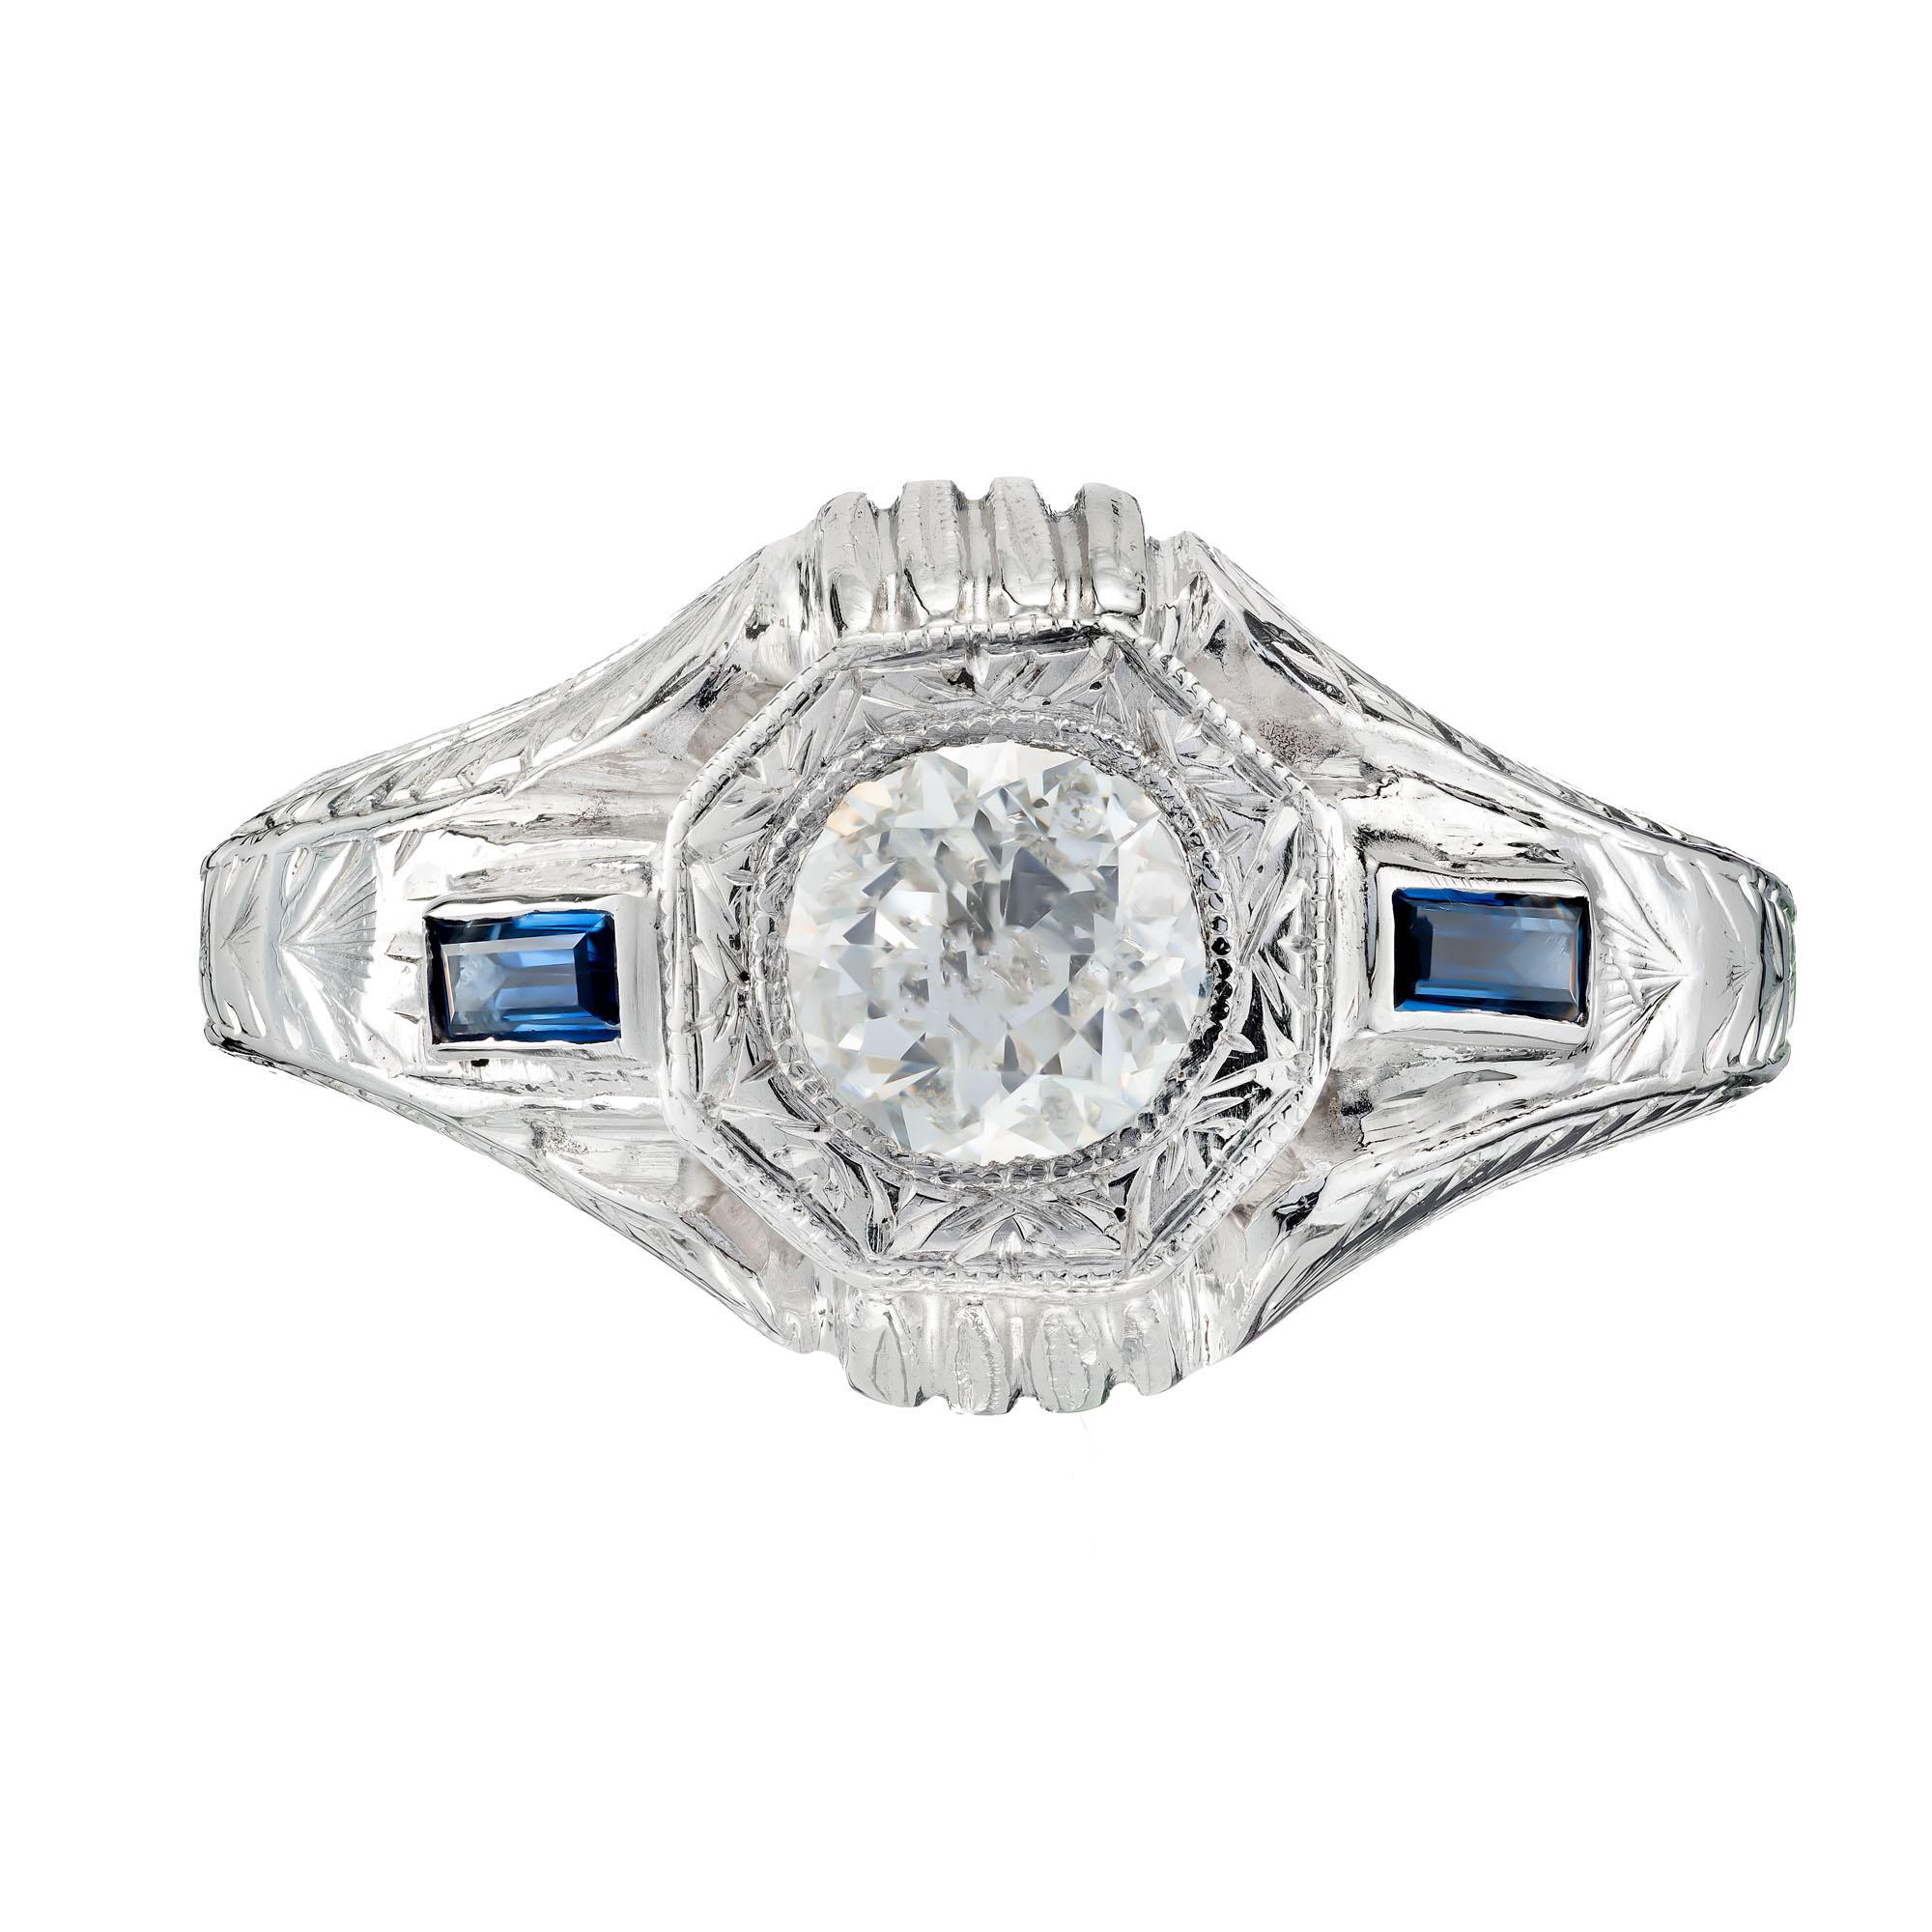 Diamond and sapphire original mens Art Deco style white gold ring. EGL certified Old European center stone with two baguette sapphire accent stones in a 14k white gold setting. Circa 1940-1950

1 Old European diamond F-G I, approx. .84ct EGL